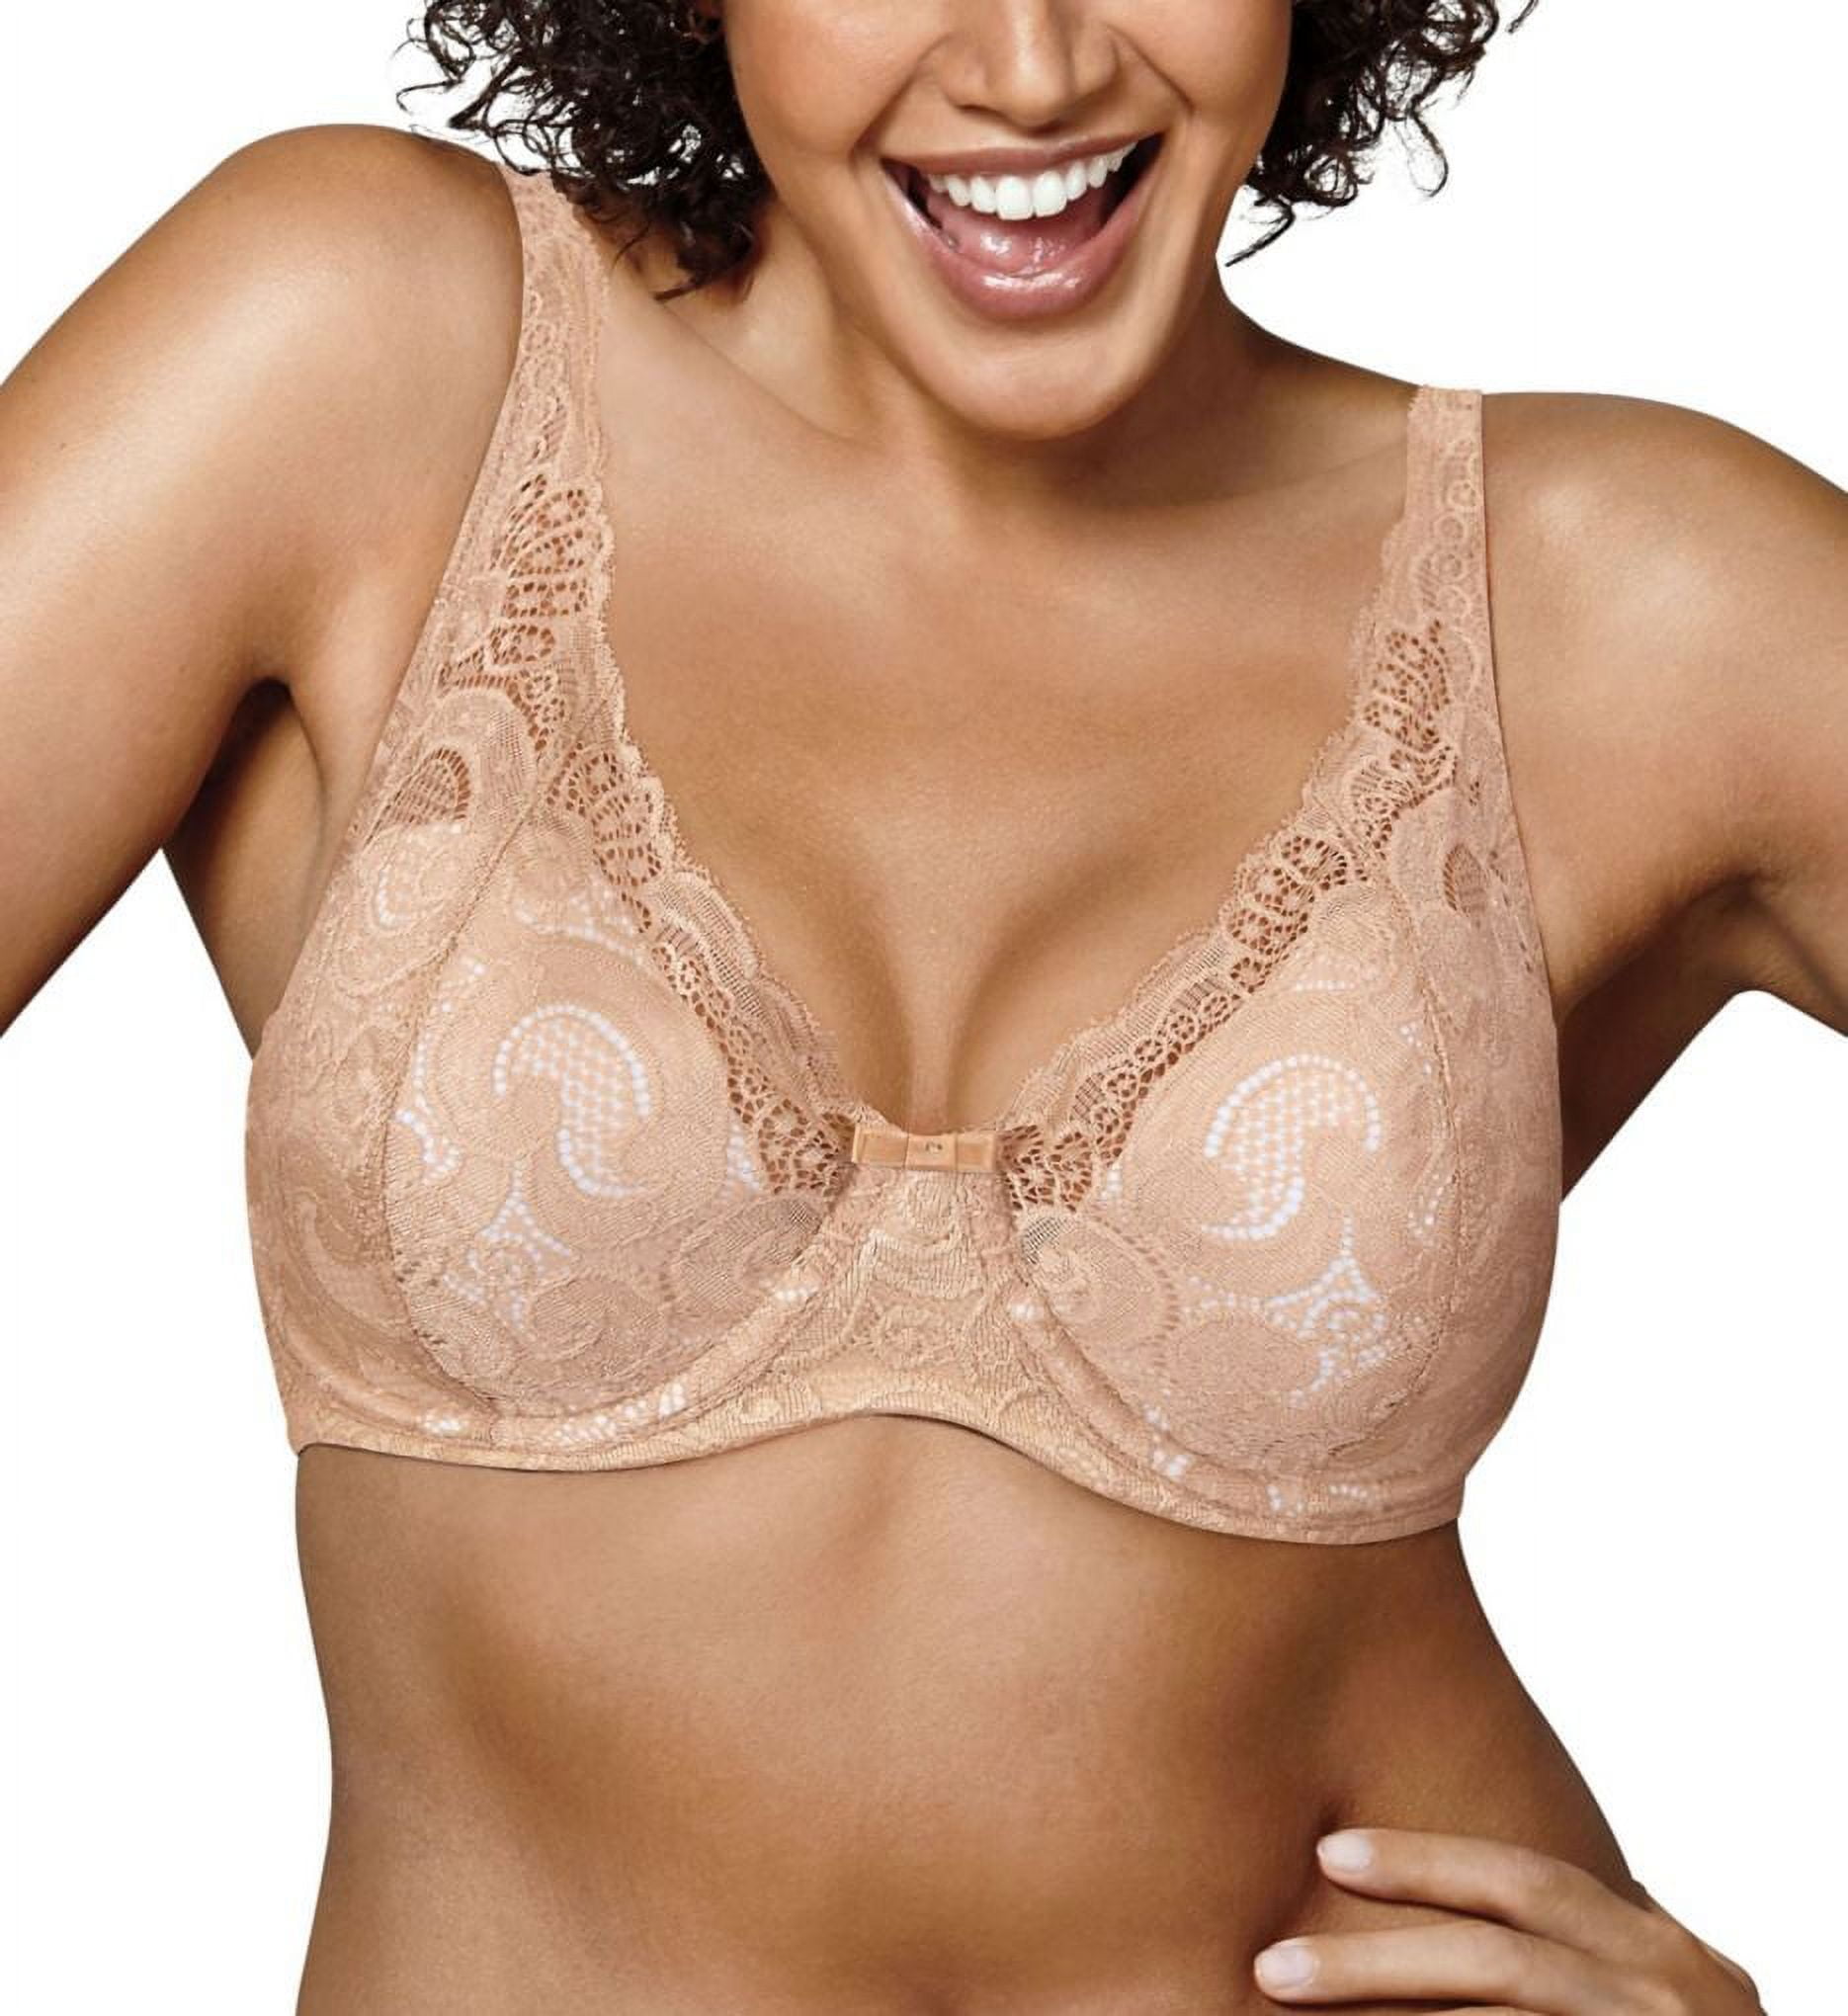 Women's Playtex US4514 Love My Curves Thin Foam with Lace Underwire Bra  (White/Nude 44C) 